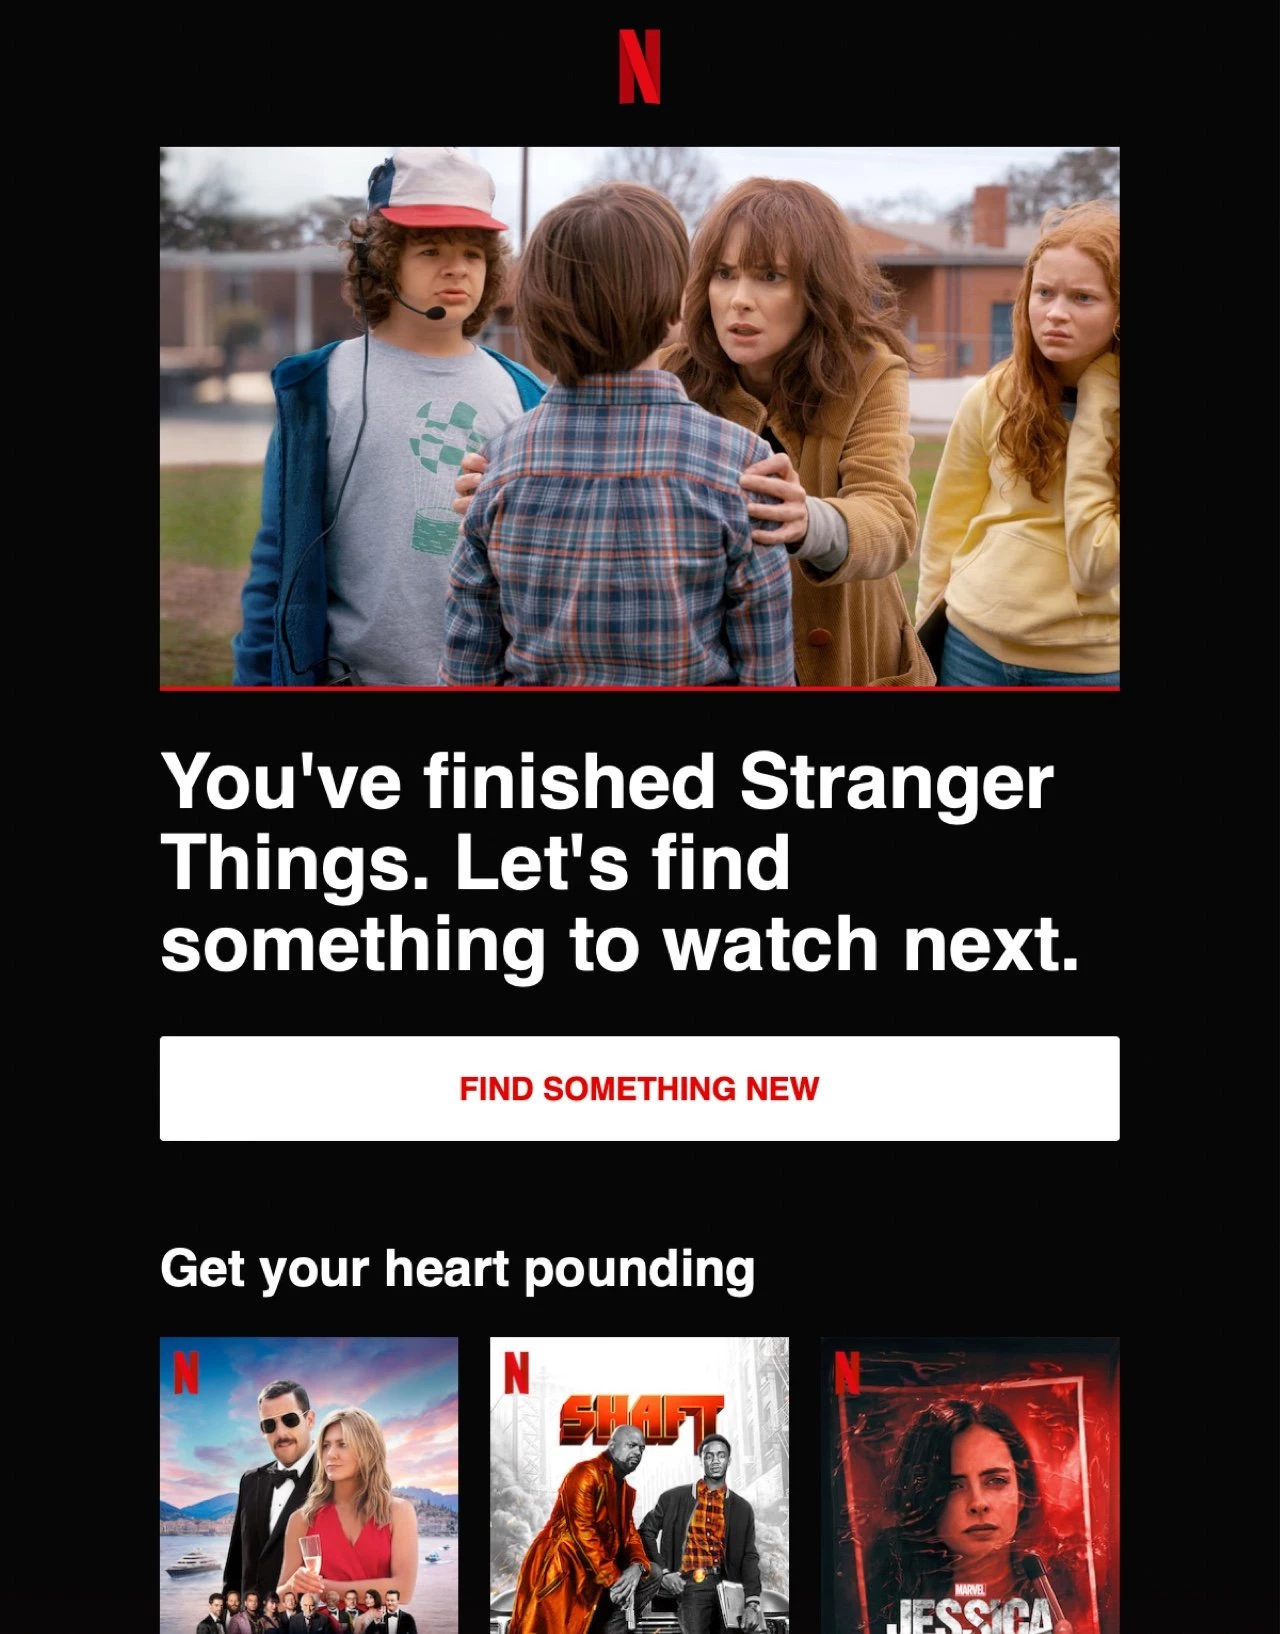 Netflix recommendation email example